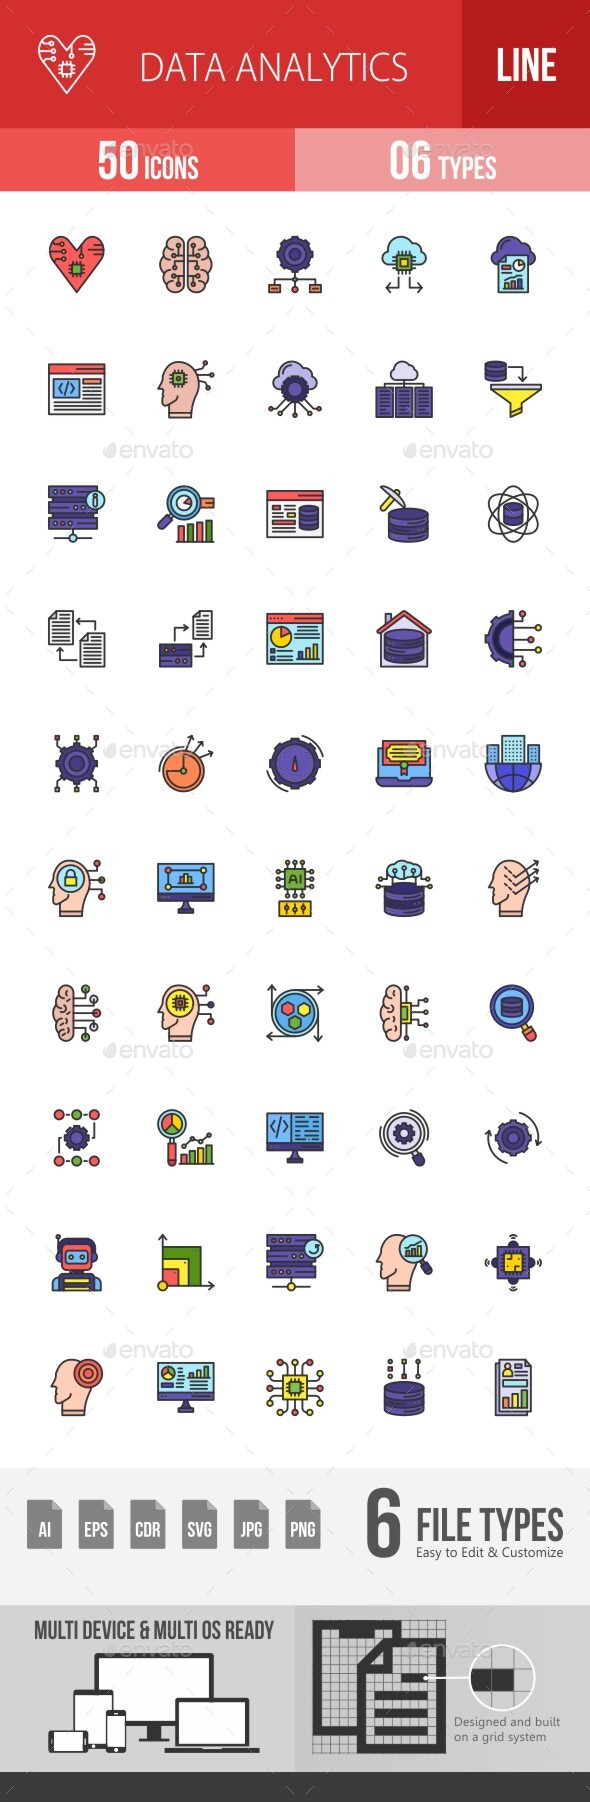 [DOWNLOAD]Data Analytics Filled Line Icons